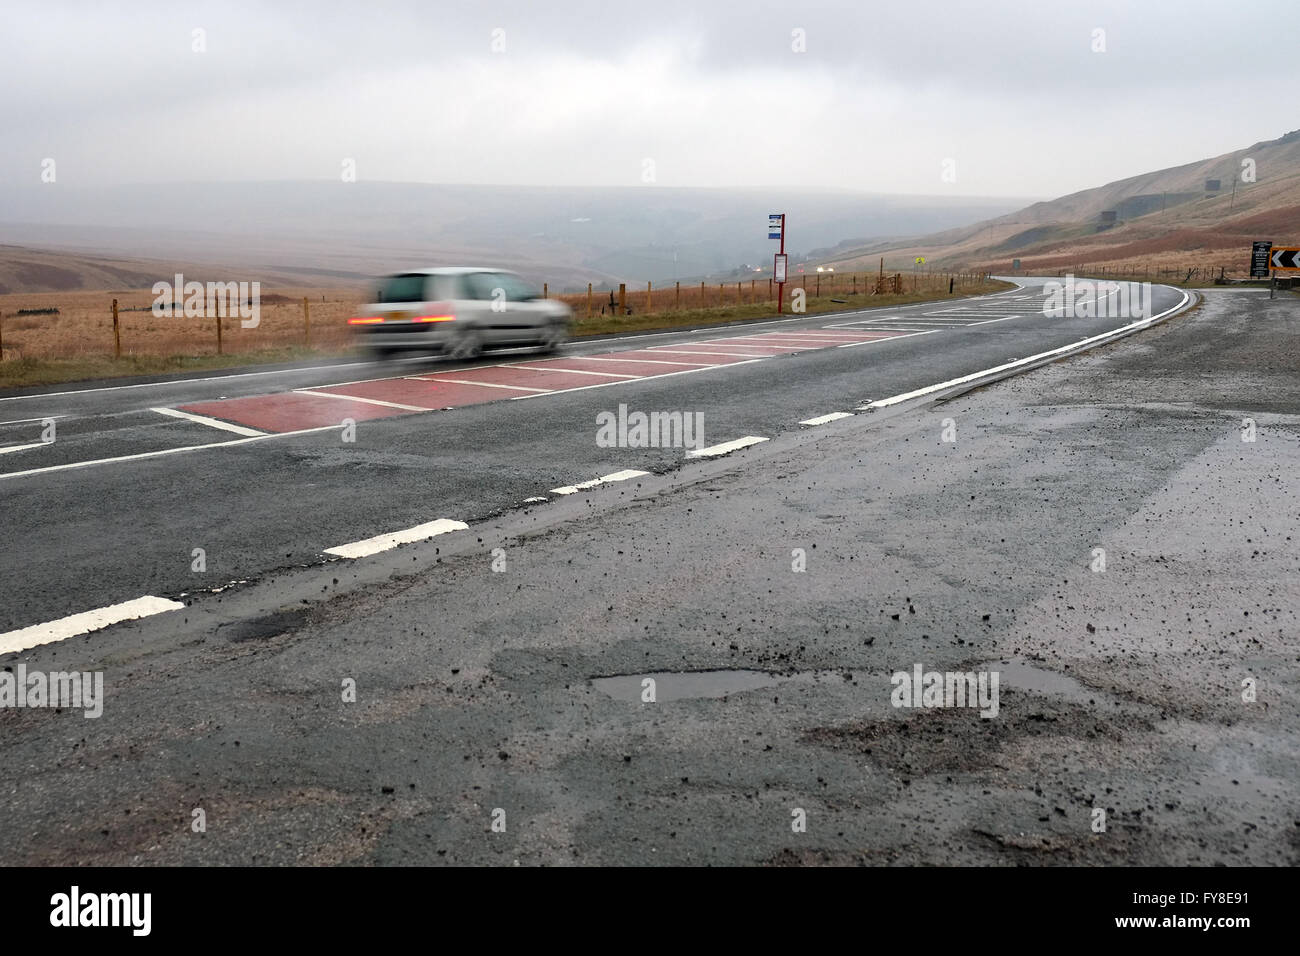 A car speeding along the A62 road in wet weather conditions near Marsden, Huddersfield, in the Yorkshire Pennines, England, UK. Stock Photo